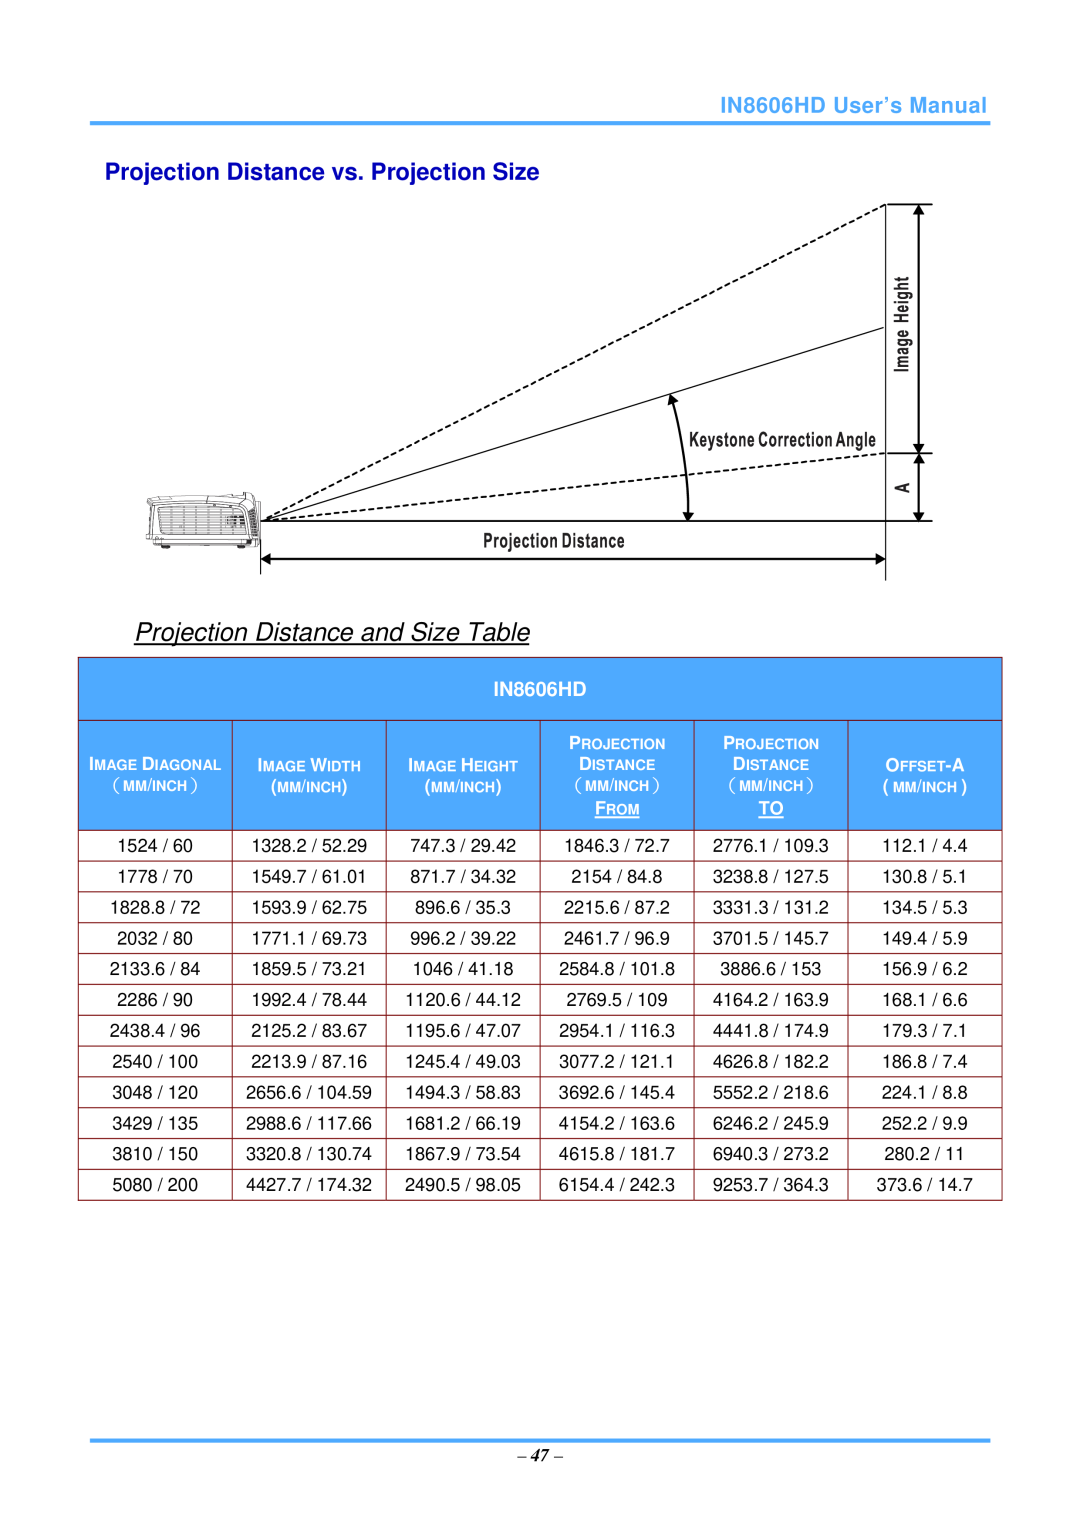 InFocus IN8606HD manual Projection Distance and Size Table, Projection Distance vs. Projection Size 